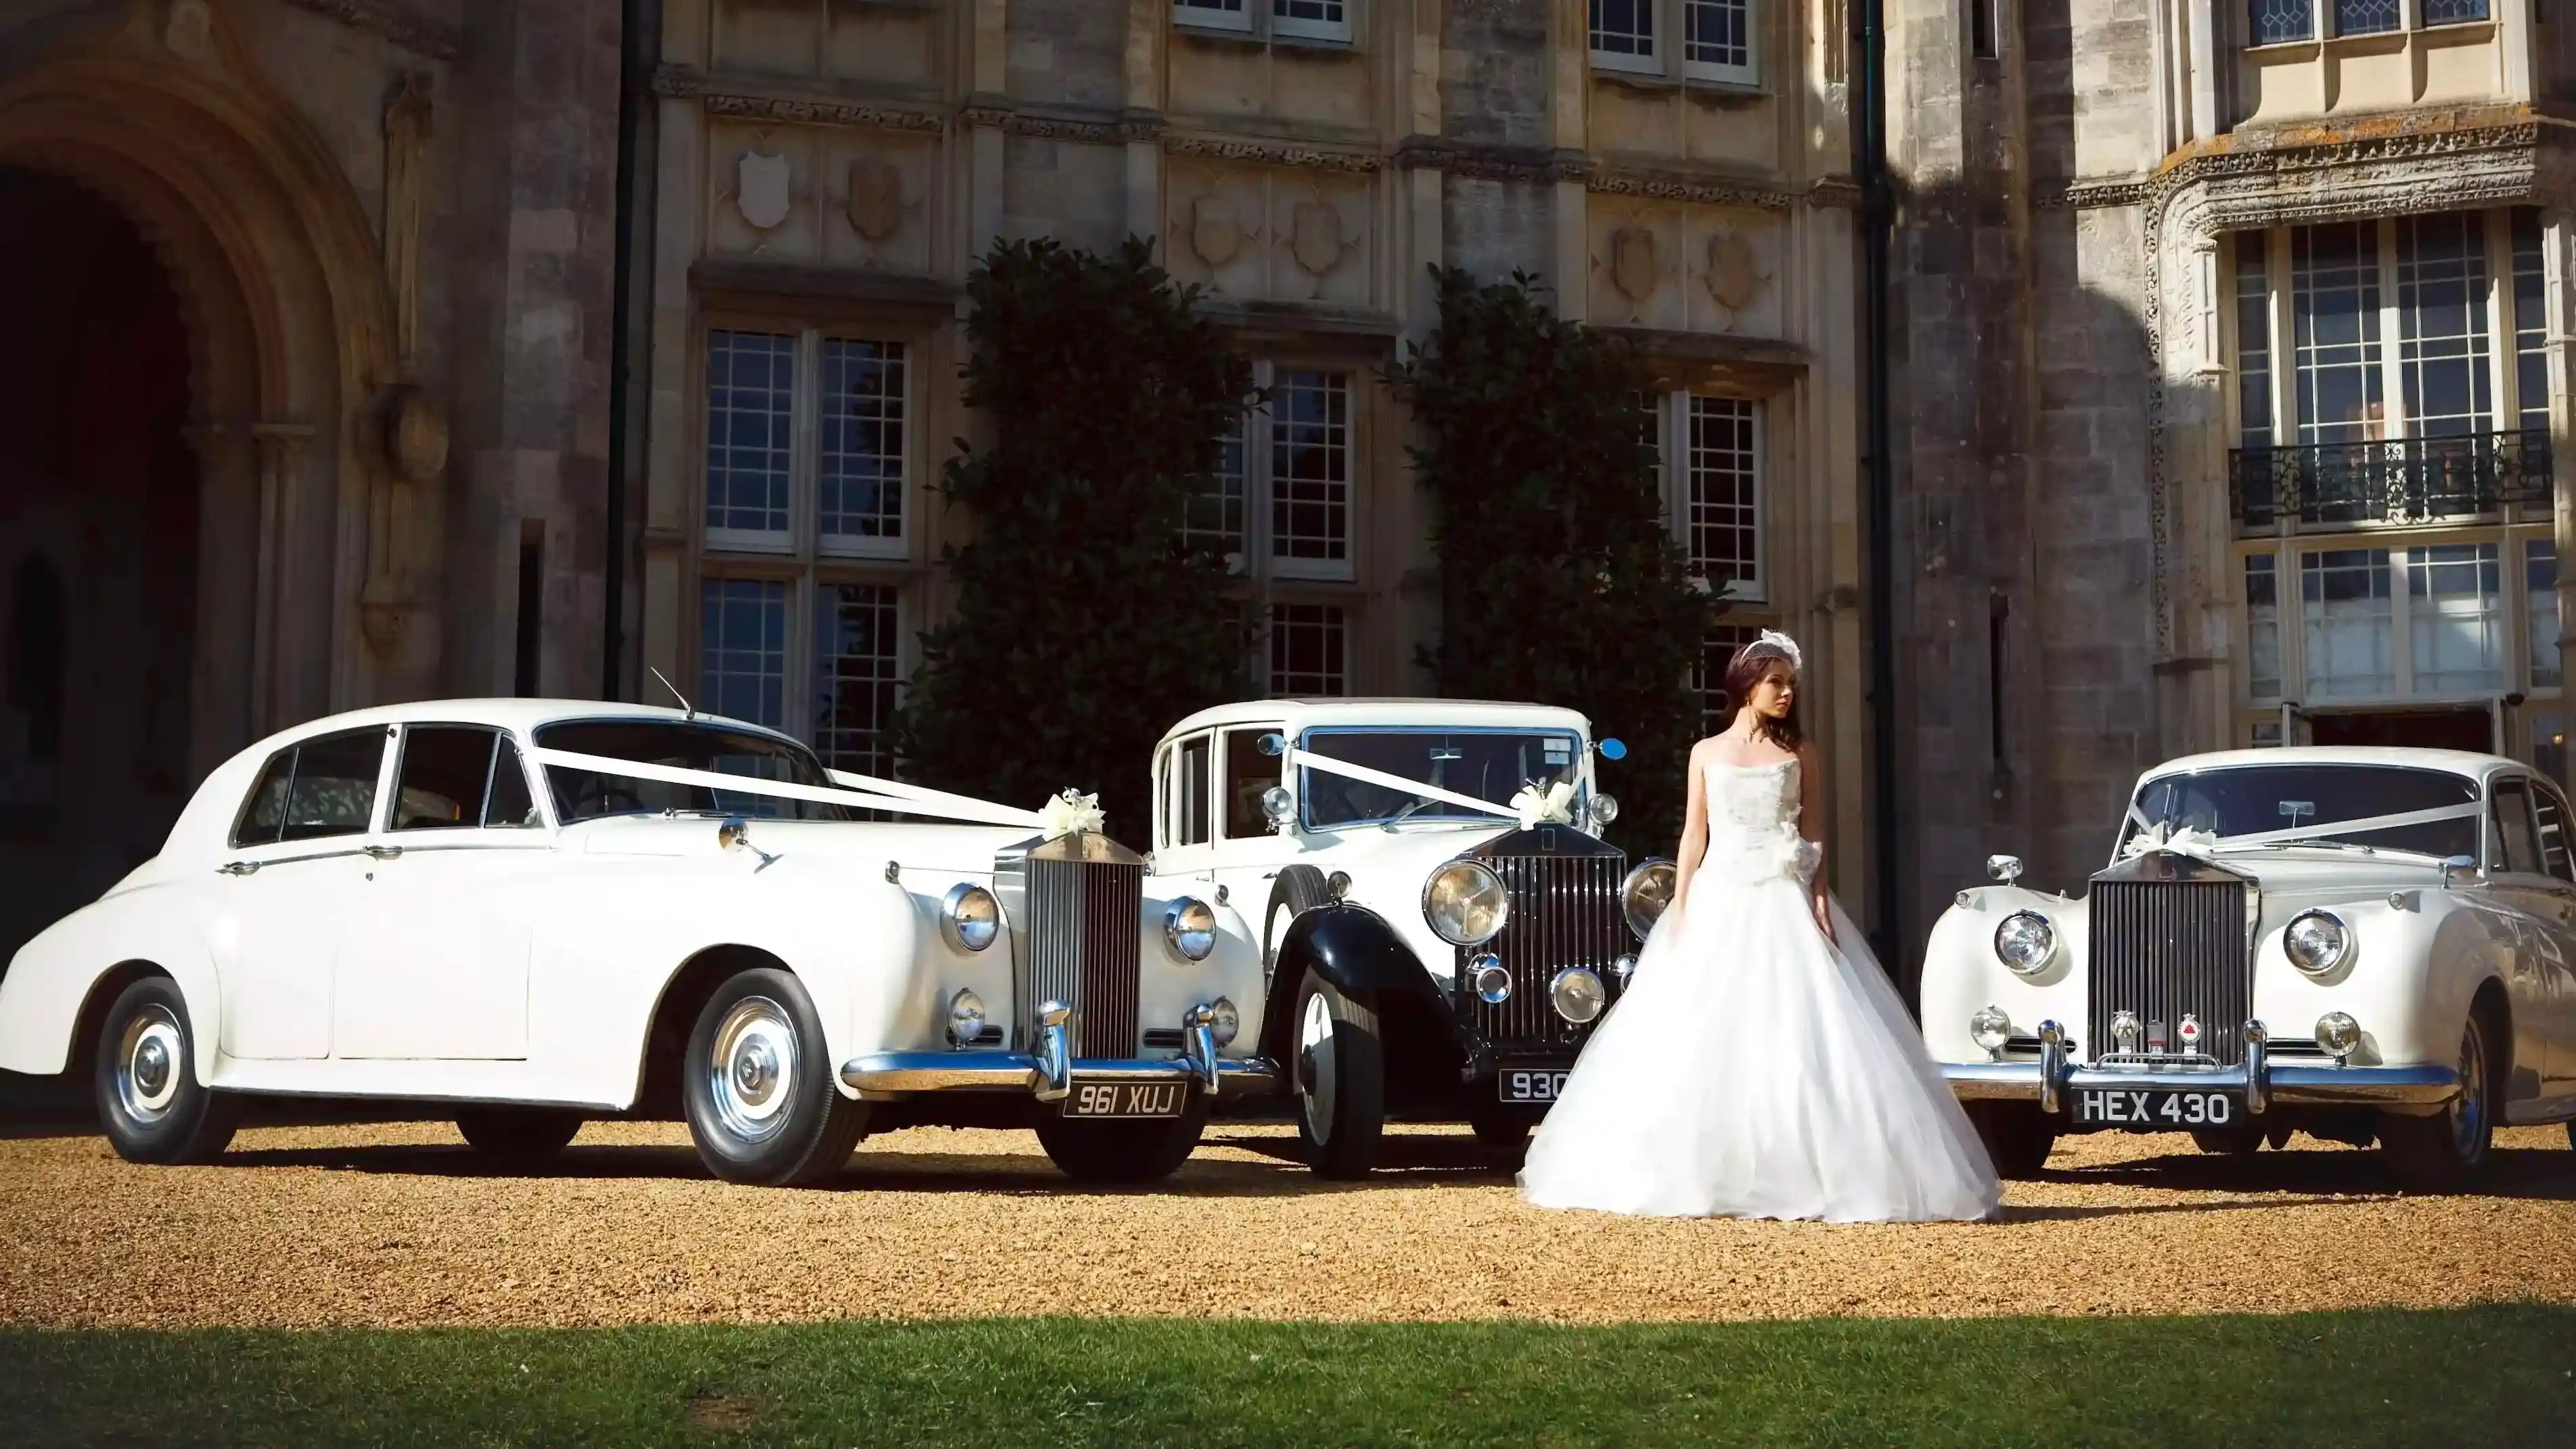 Selection of three classic and Vintage Rolls-Royce in White with Bride wearing a white wedding dress standing in the middle of the vehicles. Background is a popular wedding venue in the style of a castle in Hampshire.